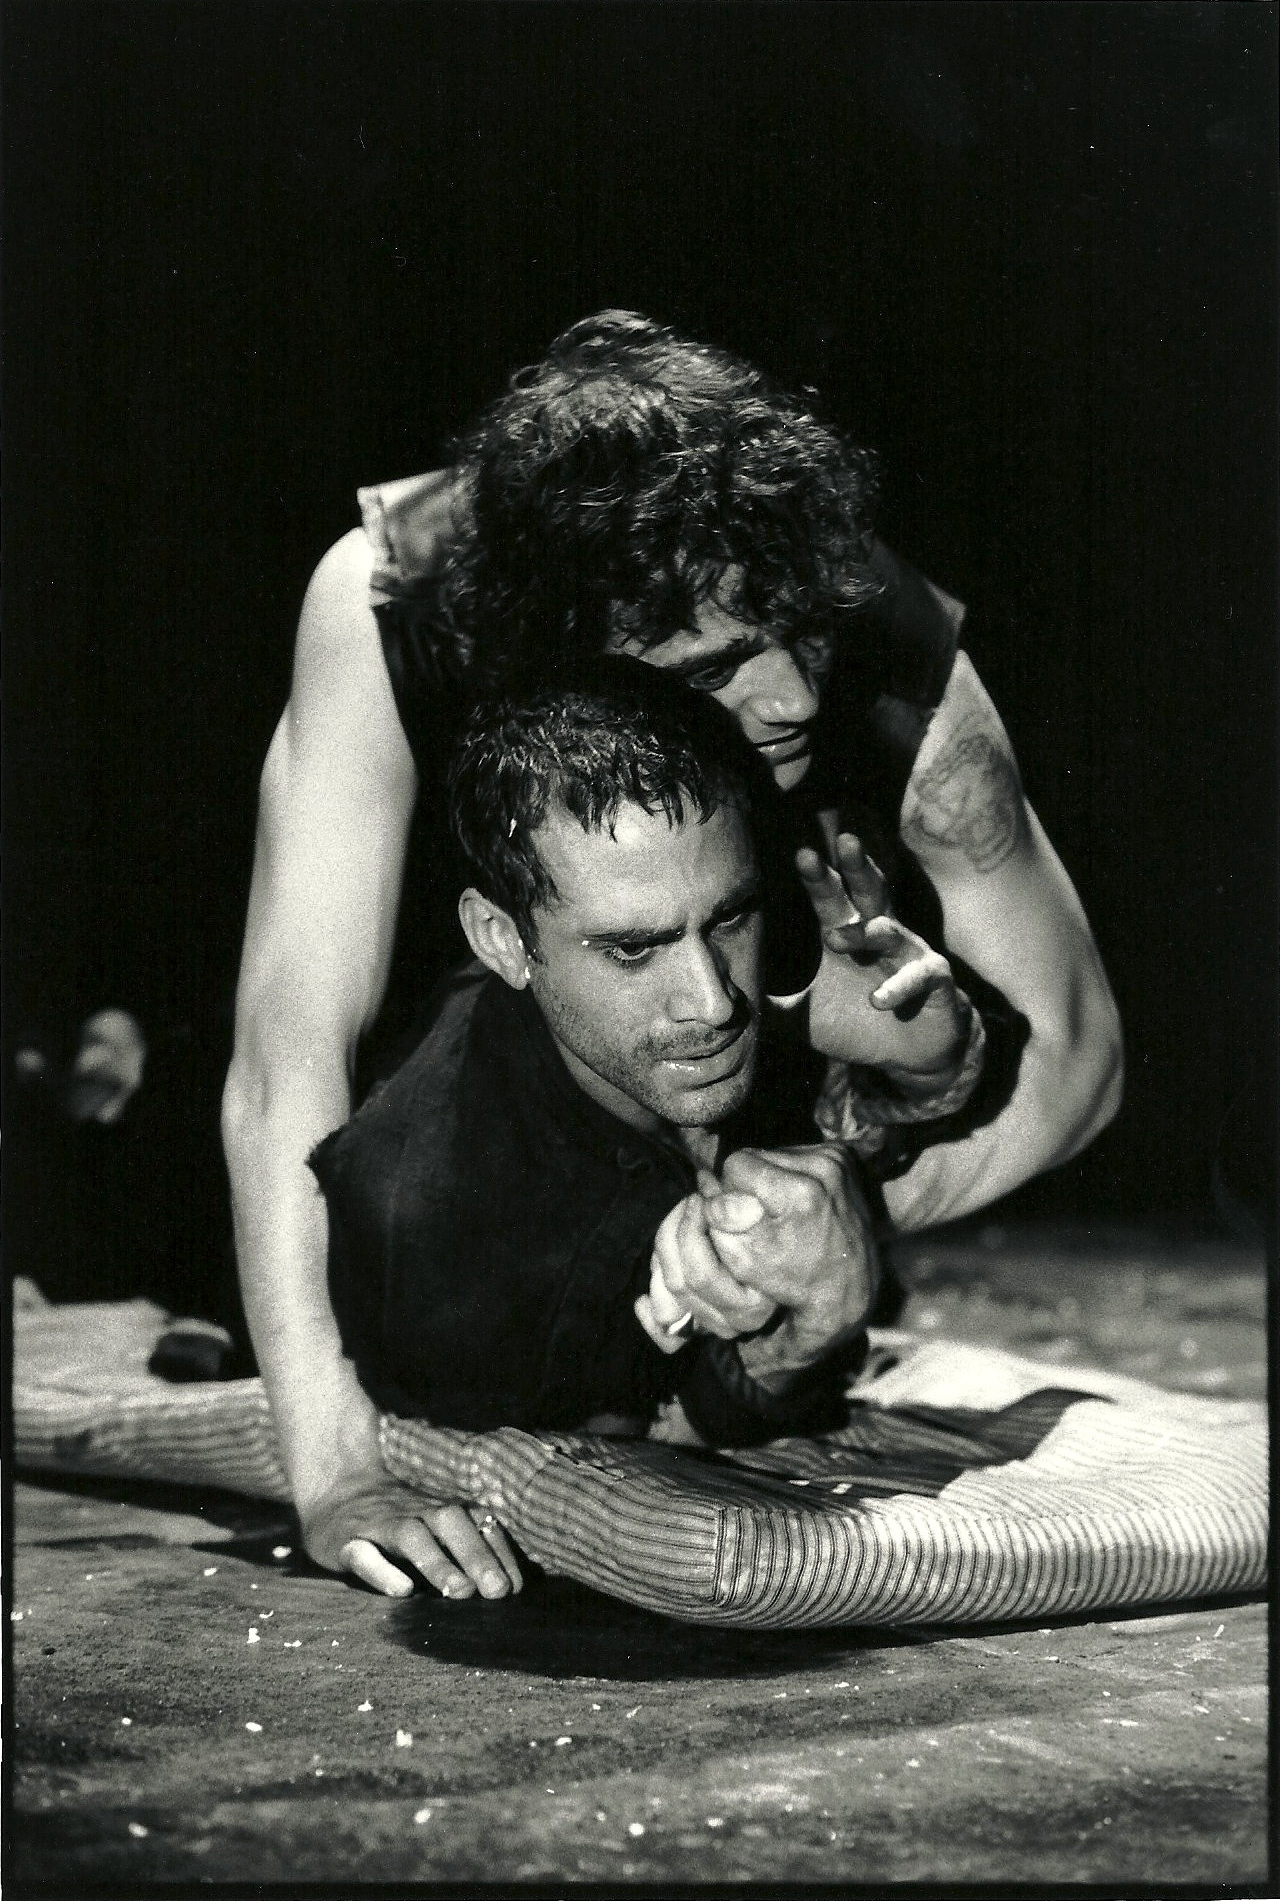 As Lightborne with Joseph Fiennes in 'Edward II' at The Sheffield Crucible Theatre in 2001